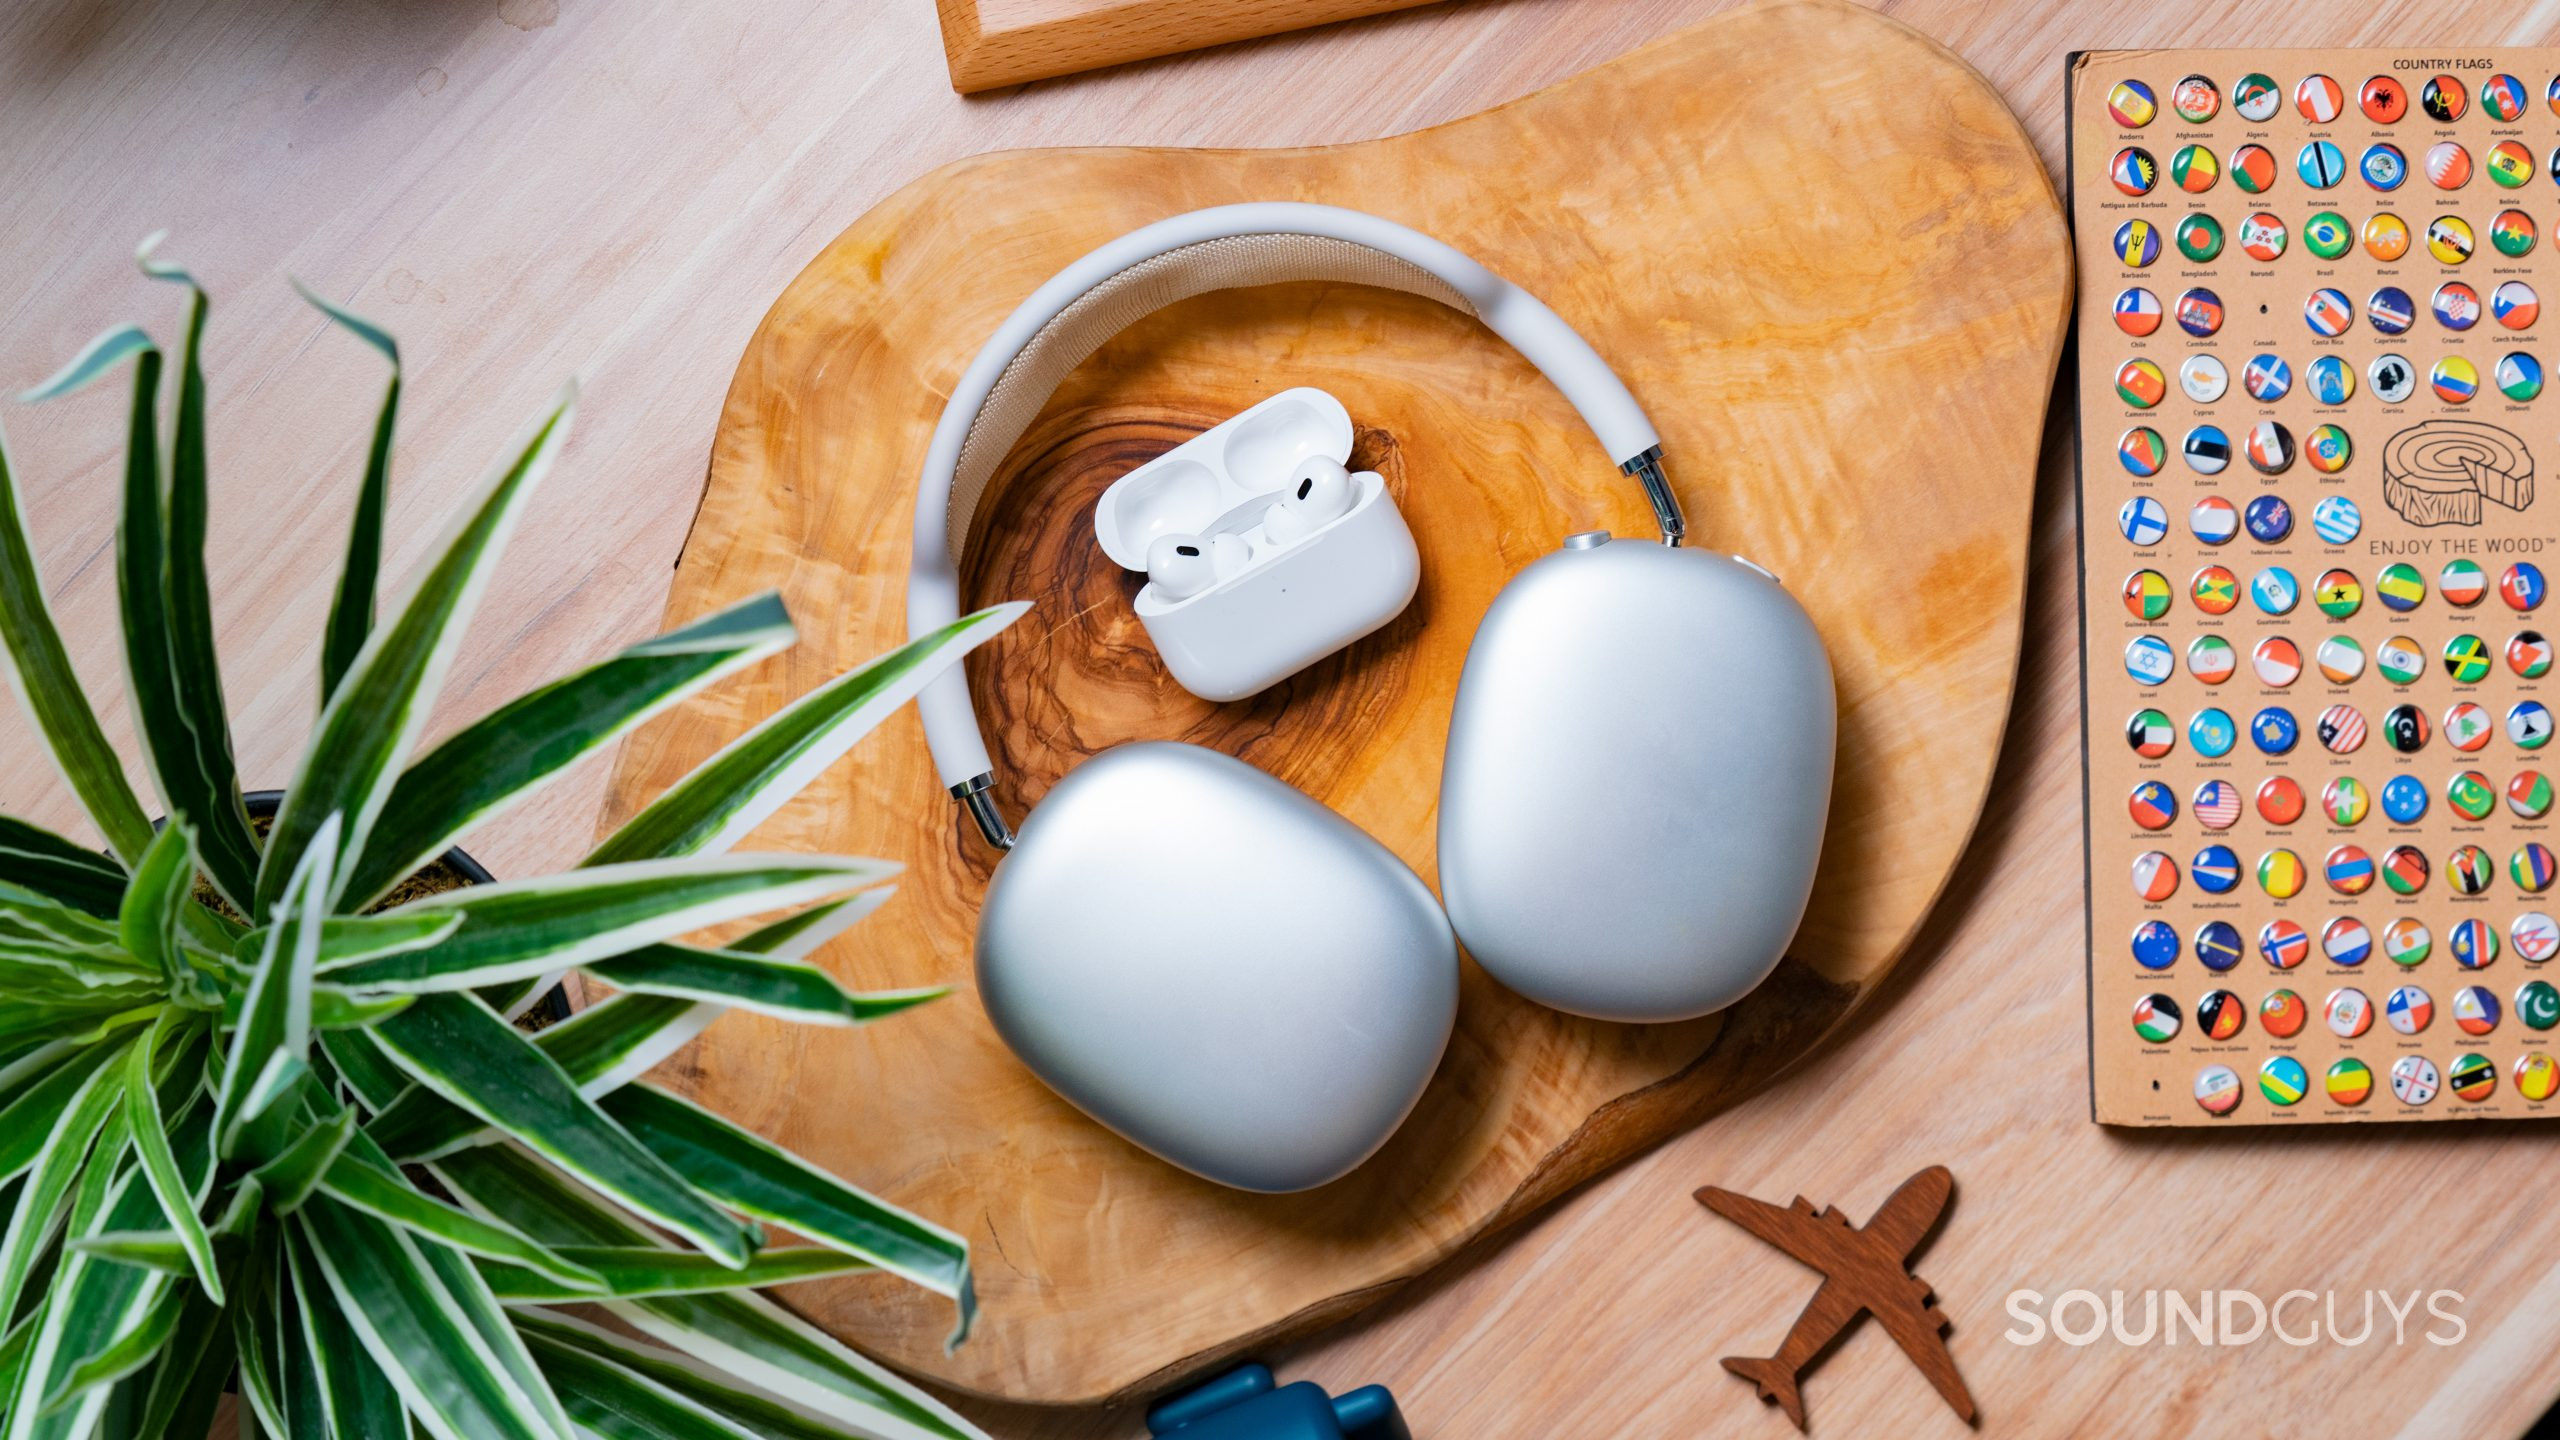 Apple AirPods Plans: 4th Generation Low-End, 3rd Generation Pro and USB-C  Max - Bloomberg